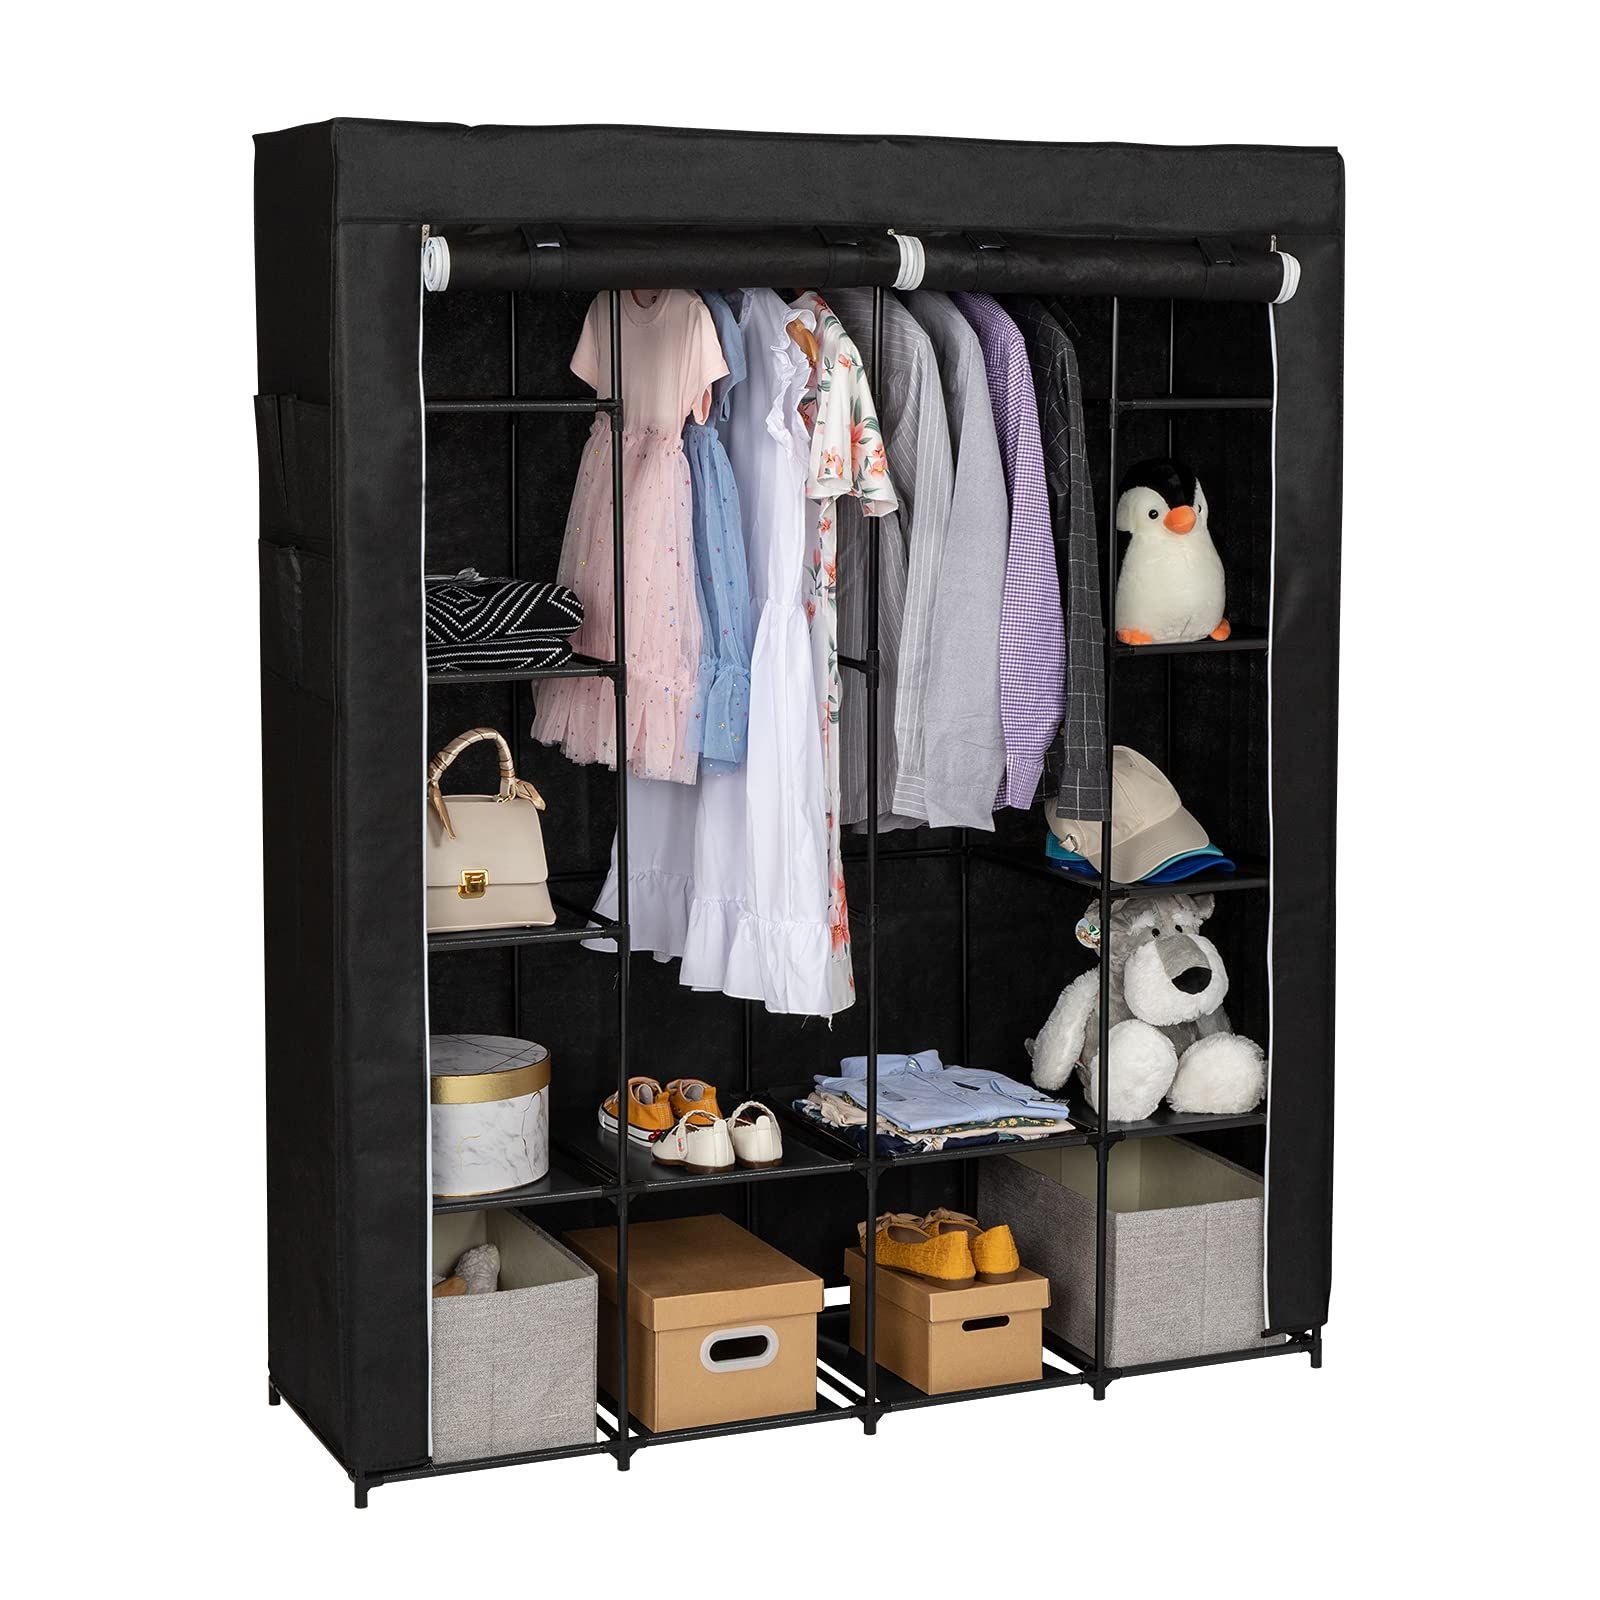 Latest 5 Tiers Wardrobes Regarding Amazon: Karl Home 5 Tiers Portable Closet, Non Woven Fabric Closet  Wardrobe, Storage Organizer With Shelves & Cover For Hanging Clothes, 56" L  X 18.5" W X 66" H, Black : Home & Kitchen (Photo 6 of 10)